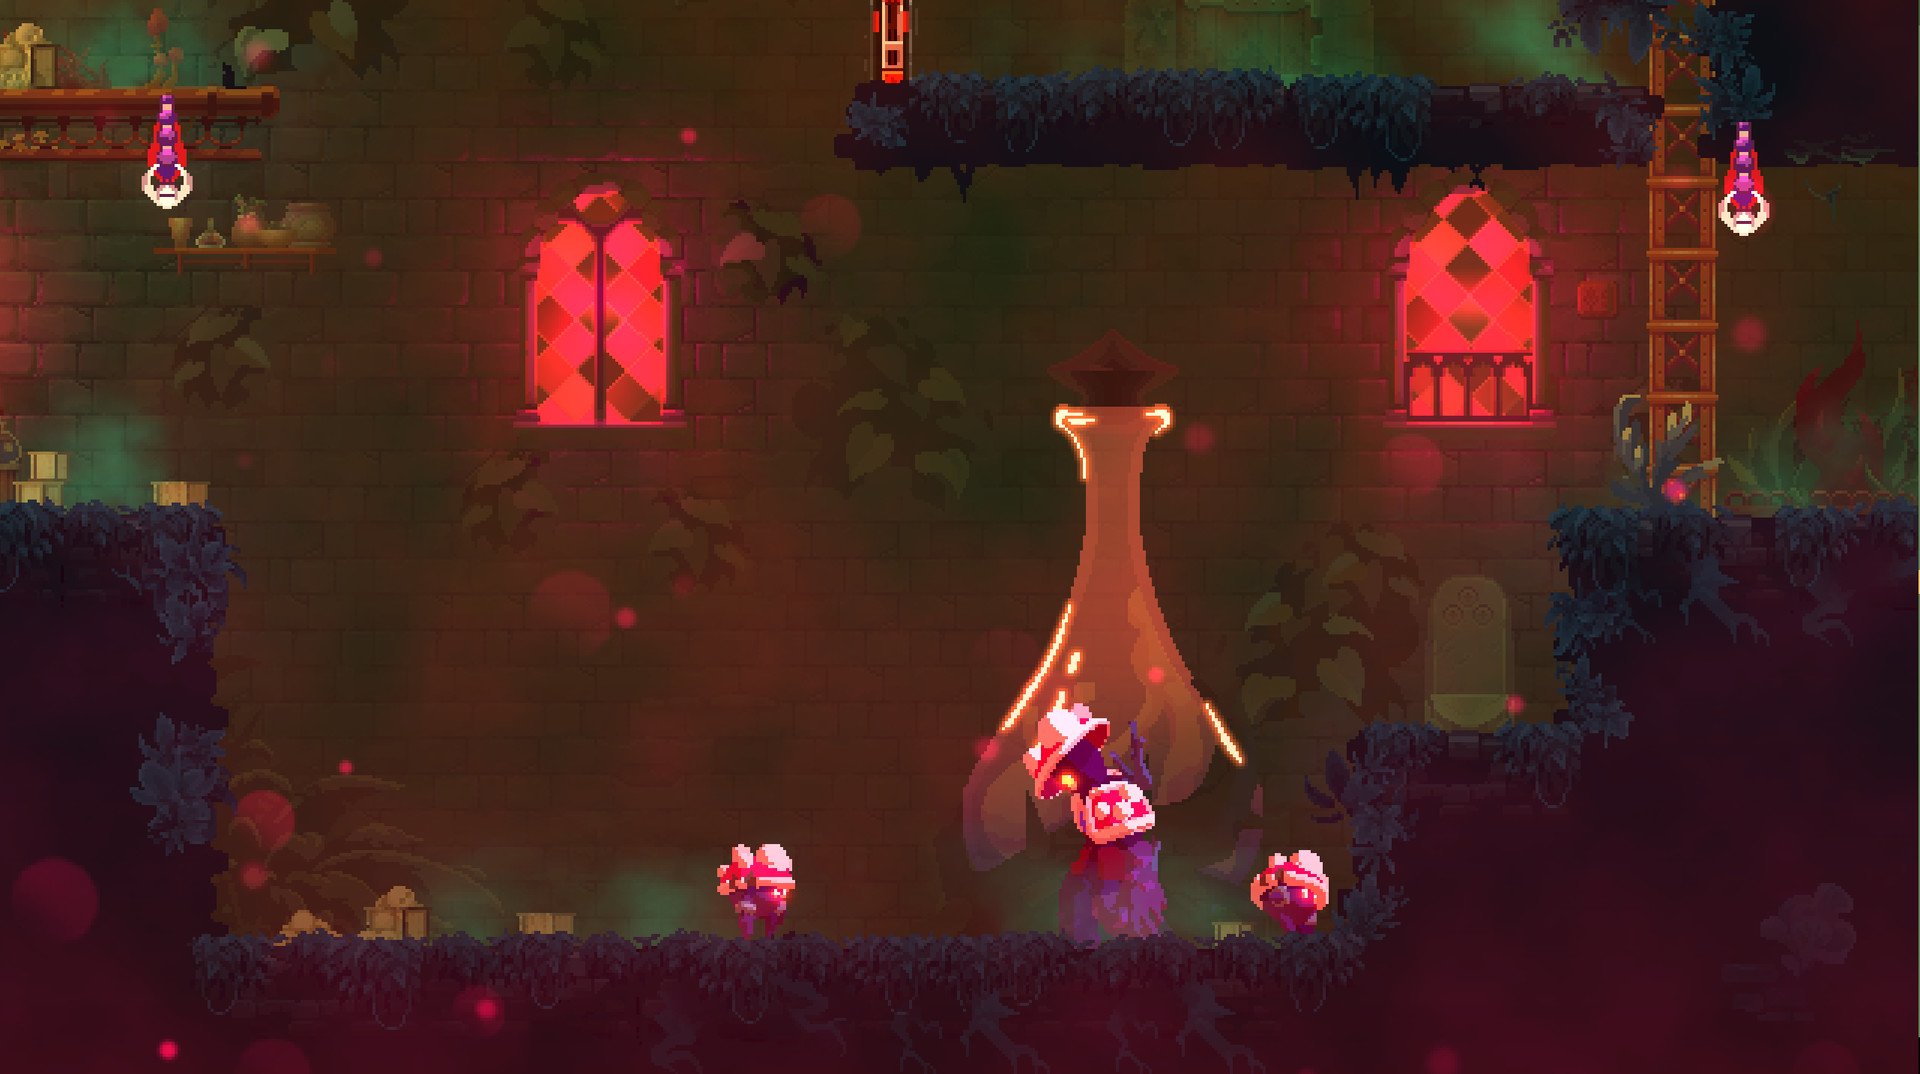 Dead Cells: The Bad Seed | TUR_IND (73cec739-2063-4819-938f-72847c5658e7)